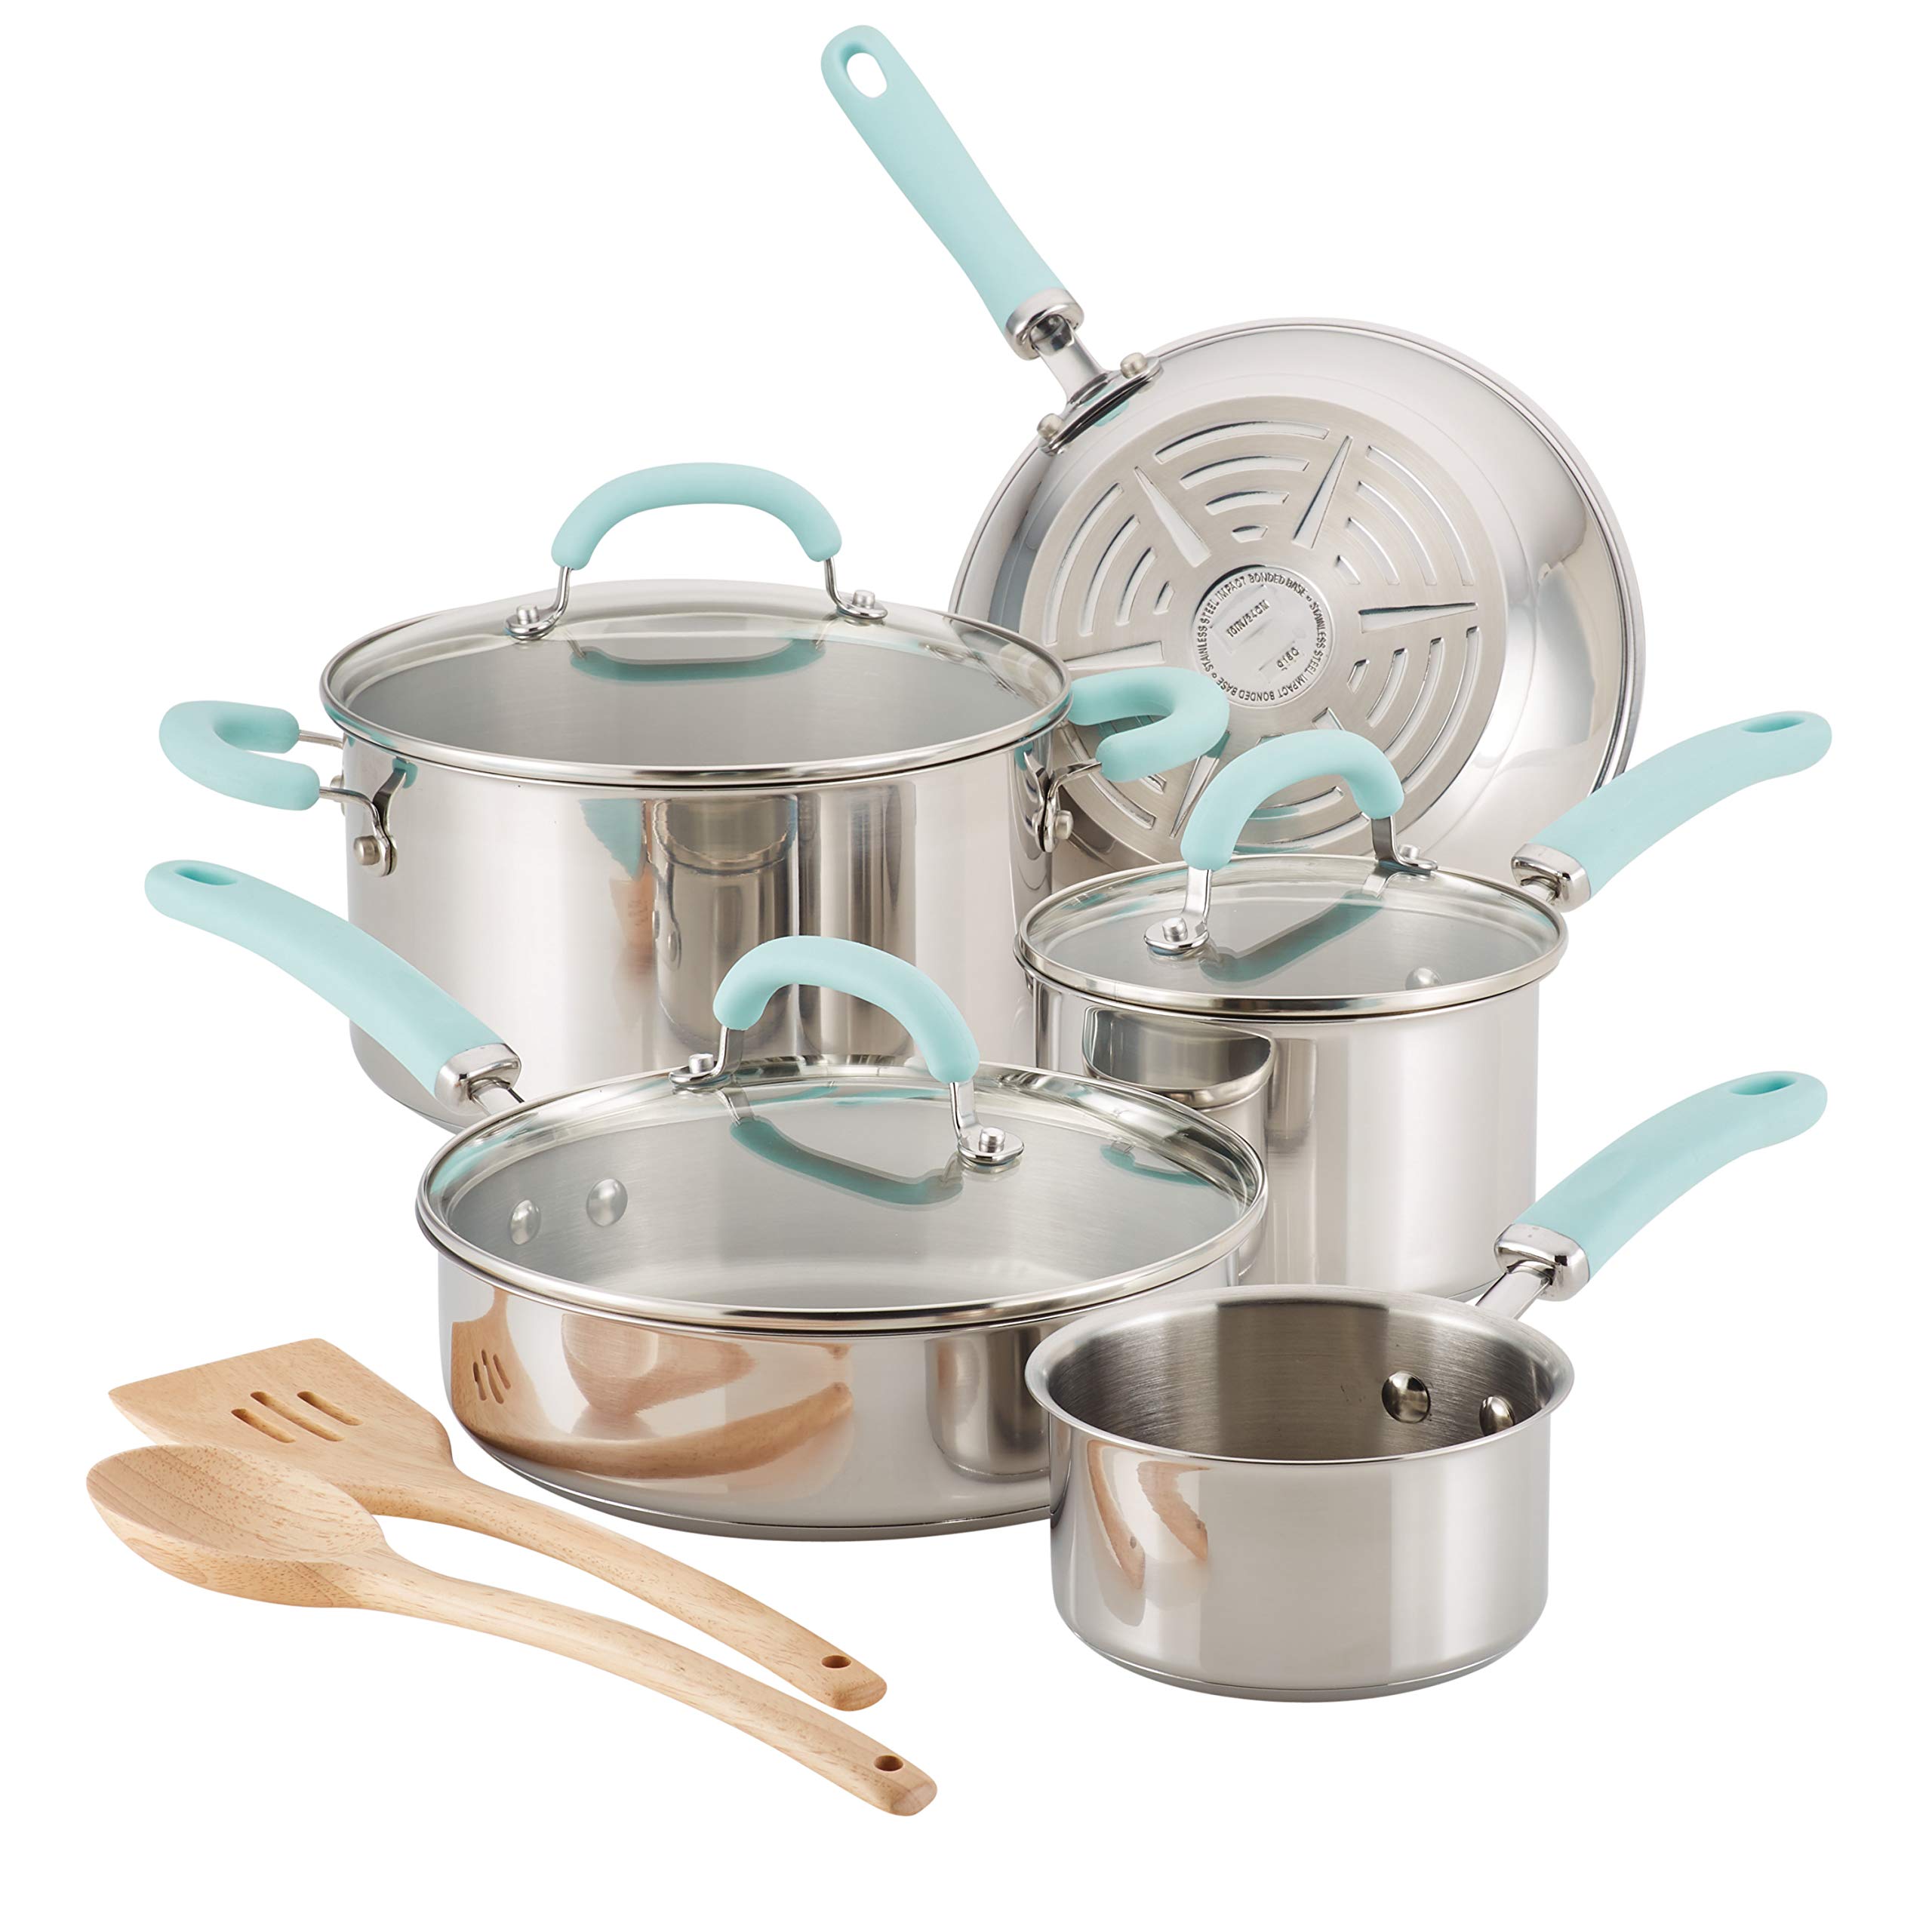 Best rachael ray stainless steel cookware